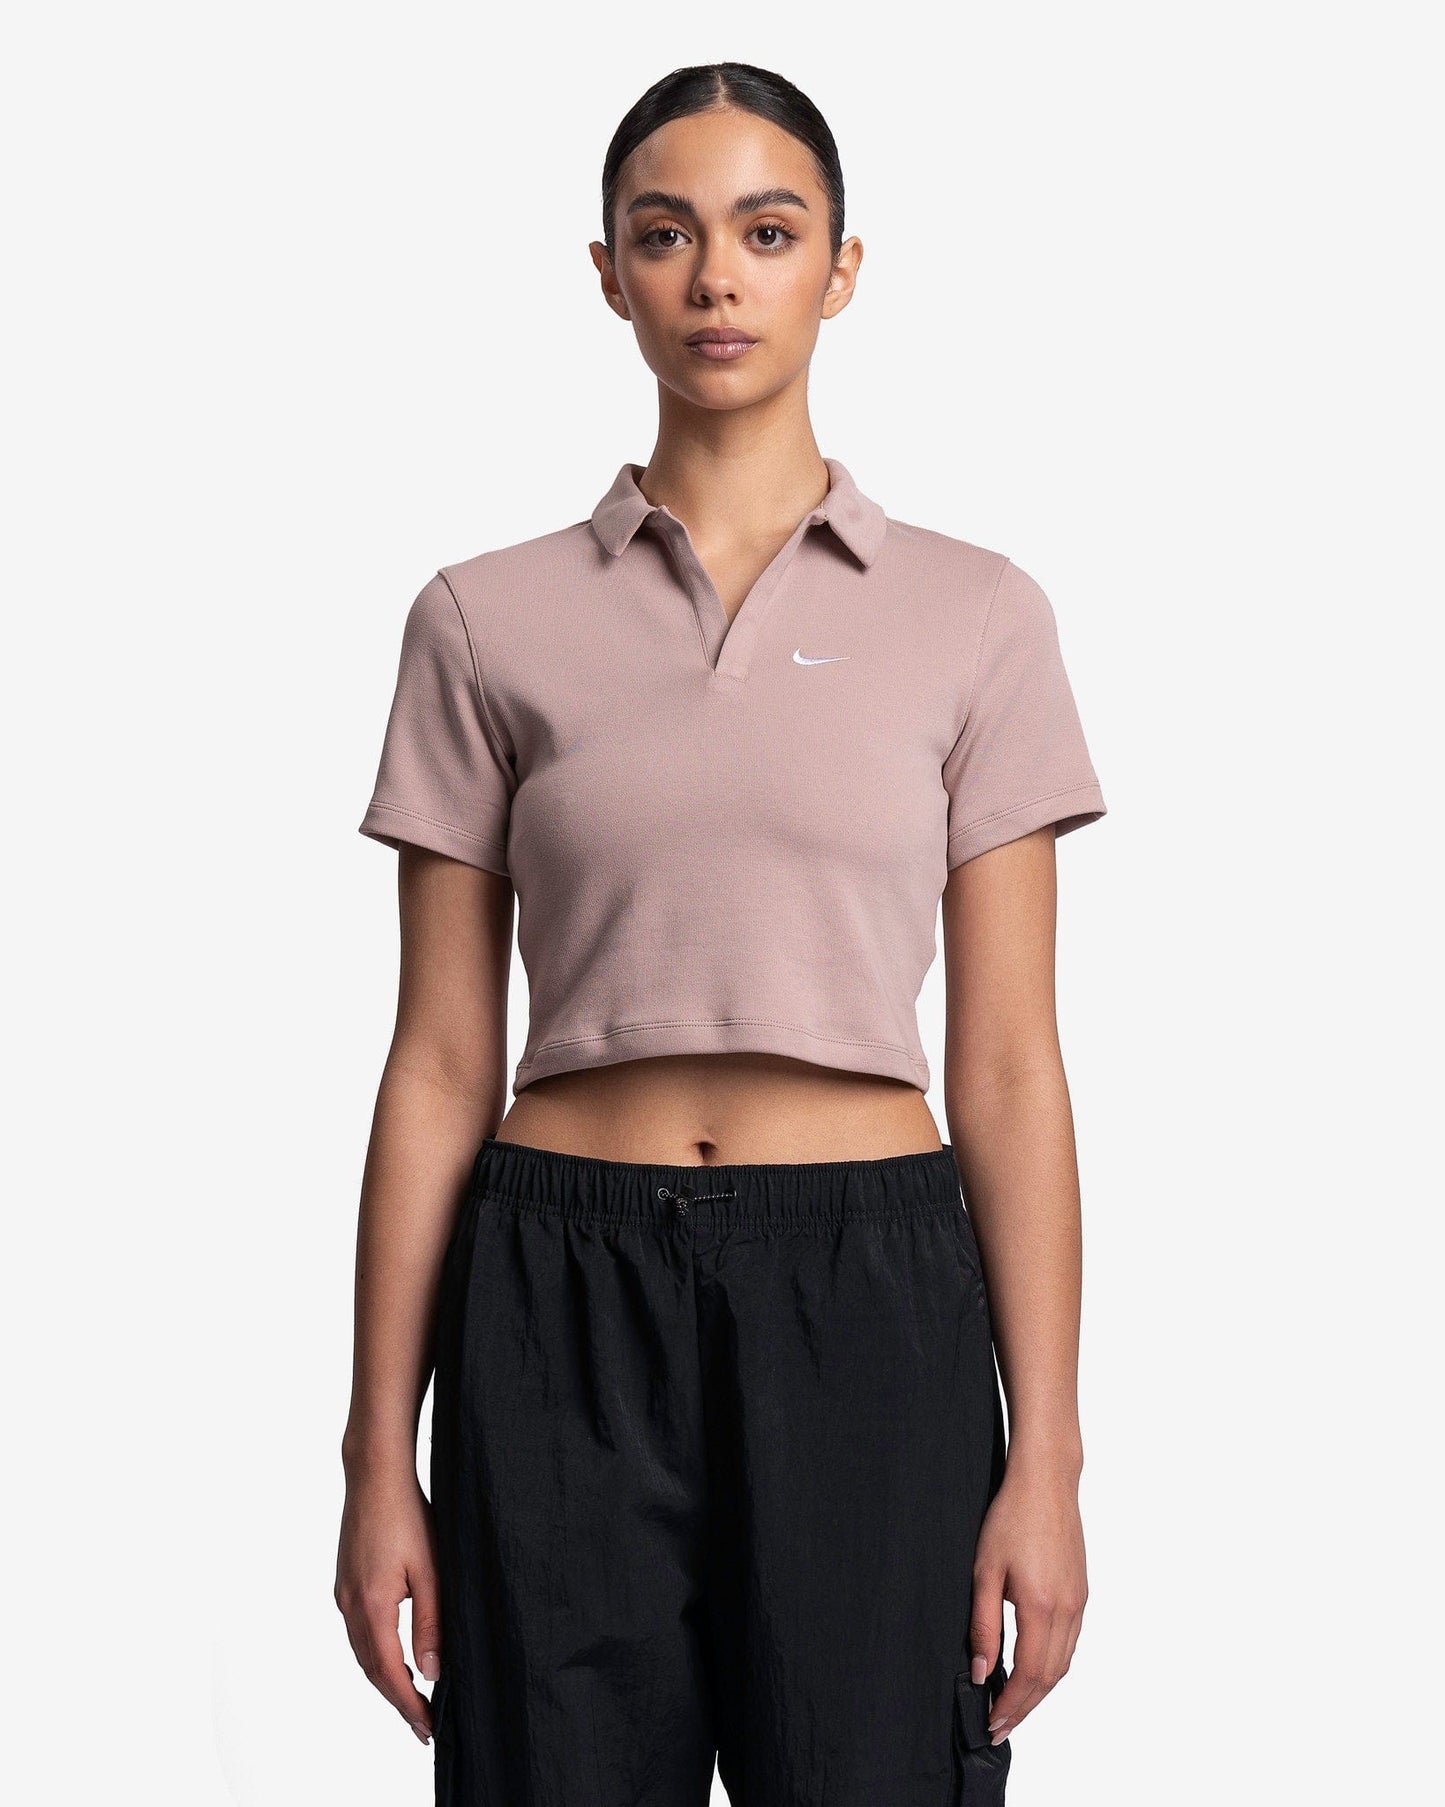 Nike Women Tops Women's NSW Essential Short Sleeve Polo in Diffused Taupe